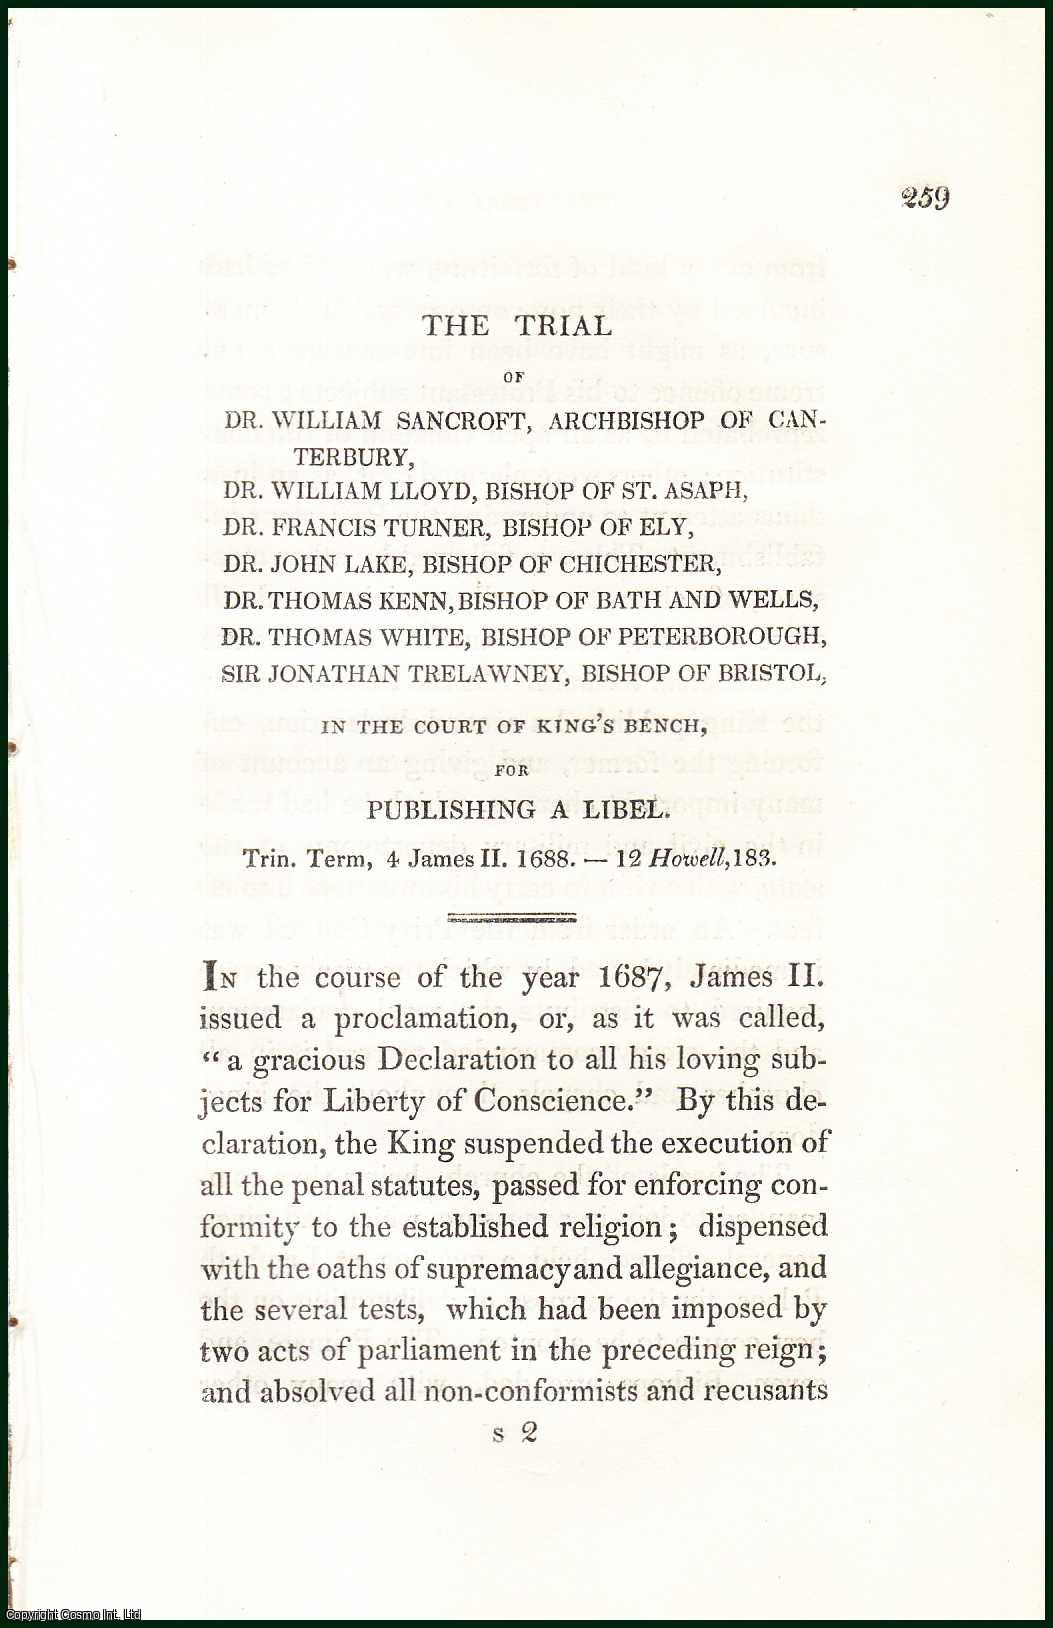 [Trial] - The Trial of Dr. William Sancroft, Archbishop of Canterbury, Dr william Lloyd, Bishop of St. Asaph, Dr. Francis Turner, Bishop of Ely, Dr. John Lake, Bishop of Chichester, & others, in The Court of King's Bench, for Publishing a Libel, 1688. An uncommon original article from the Collected State Trials, 1826.